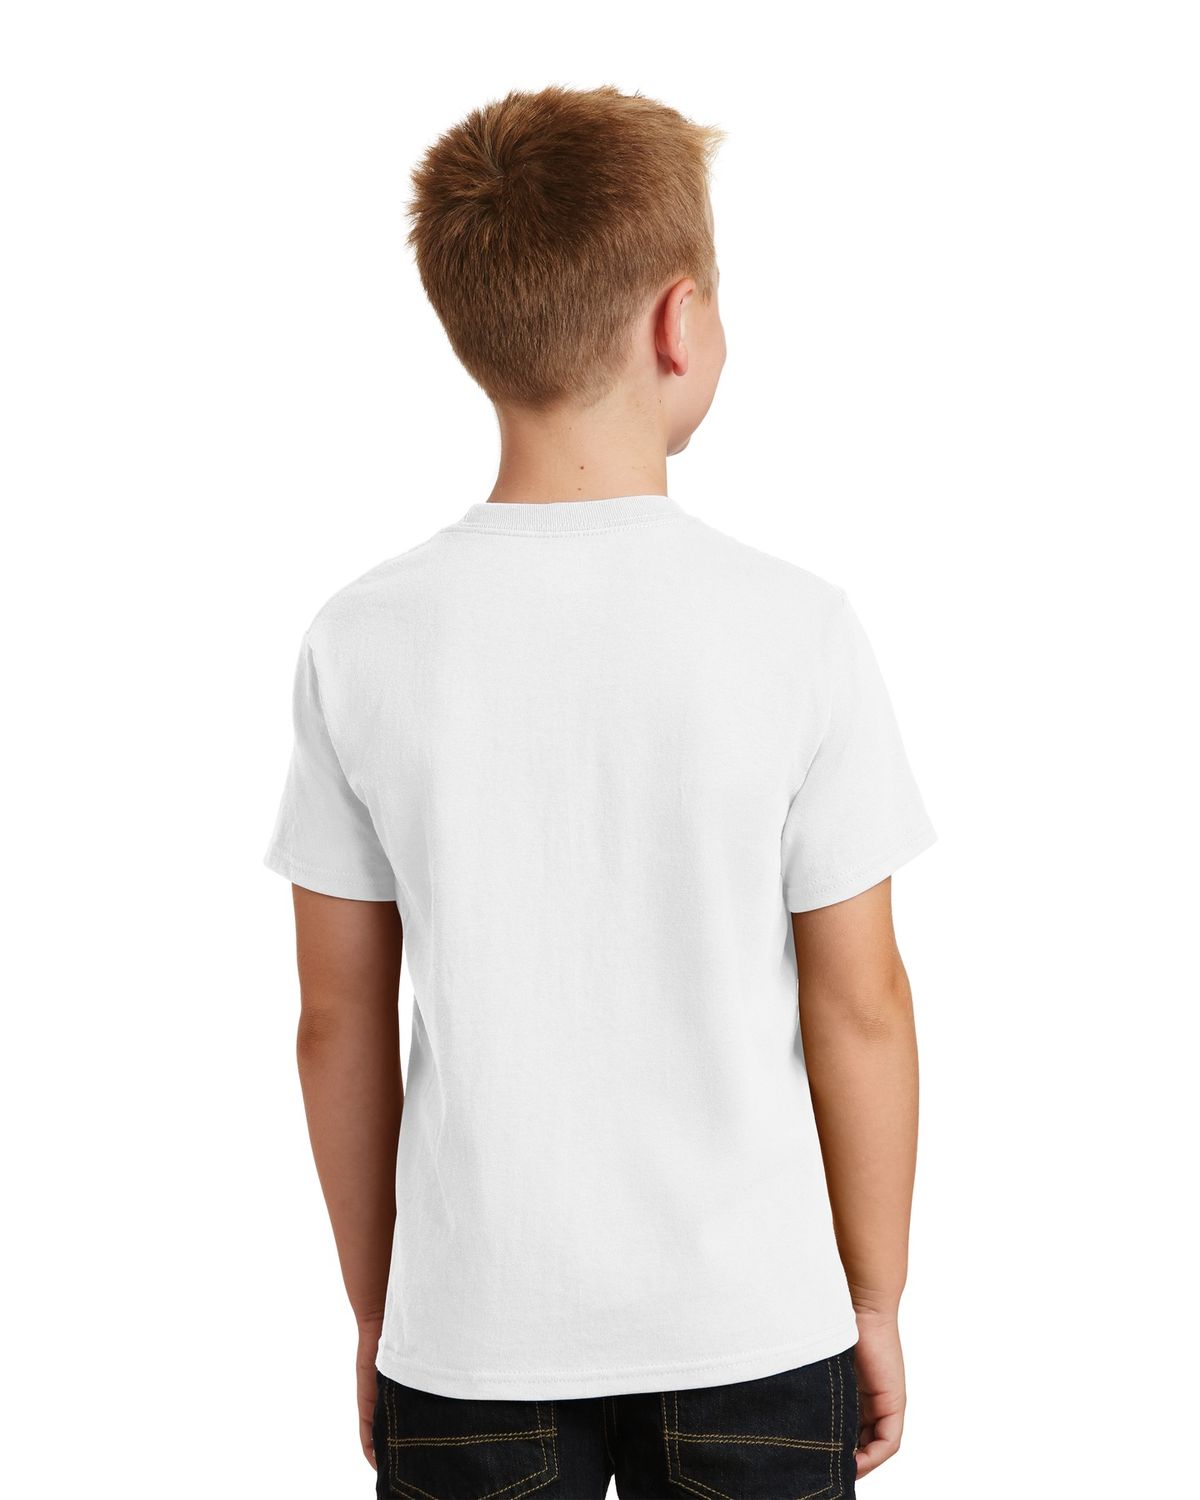 'Port & Company PC54Y Youth Core Cotton T-Shirt'